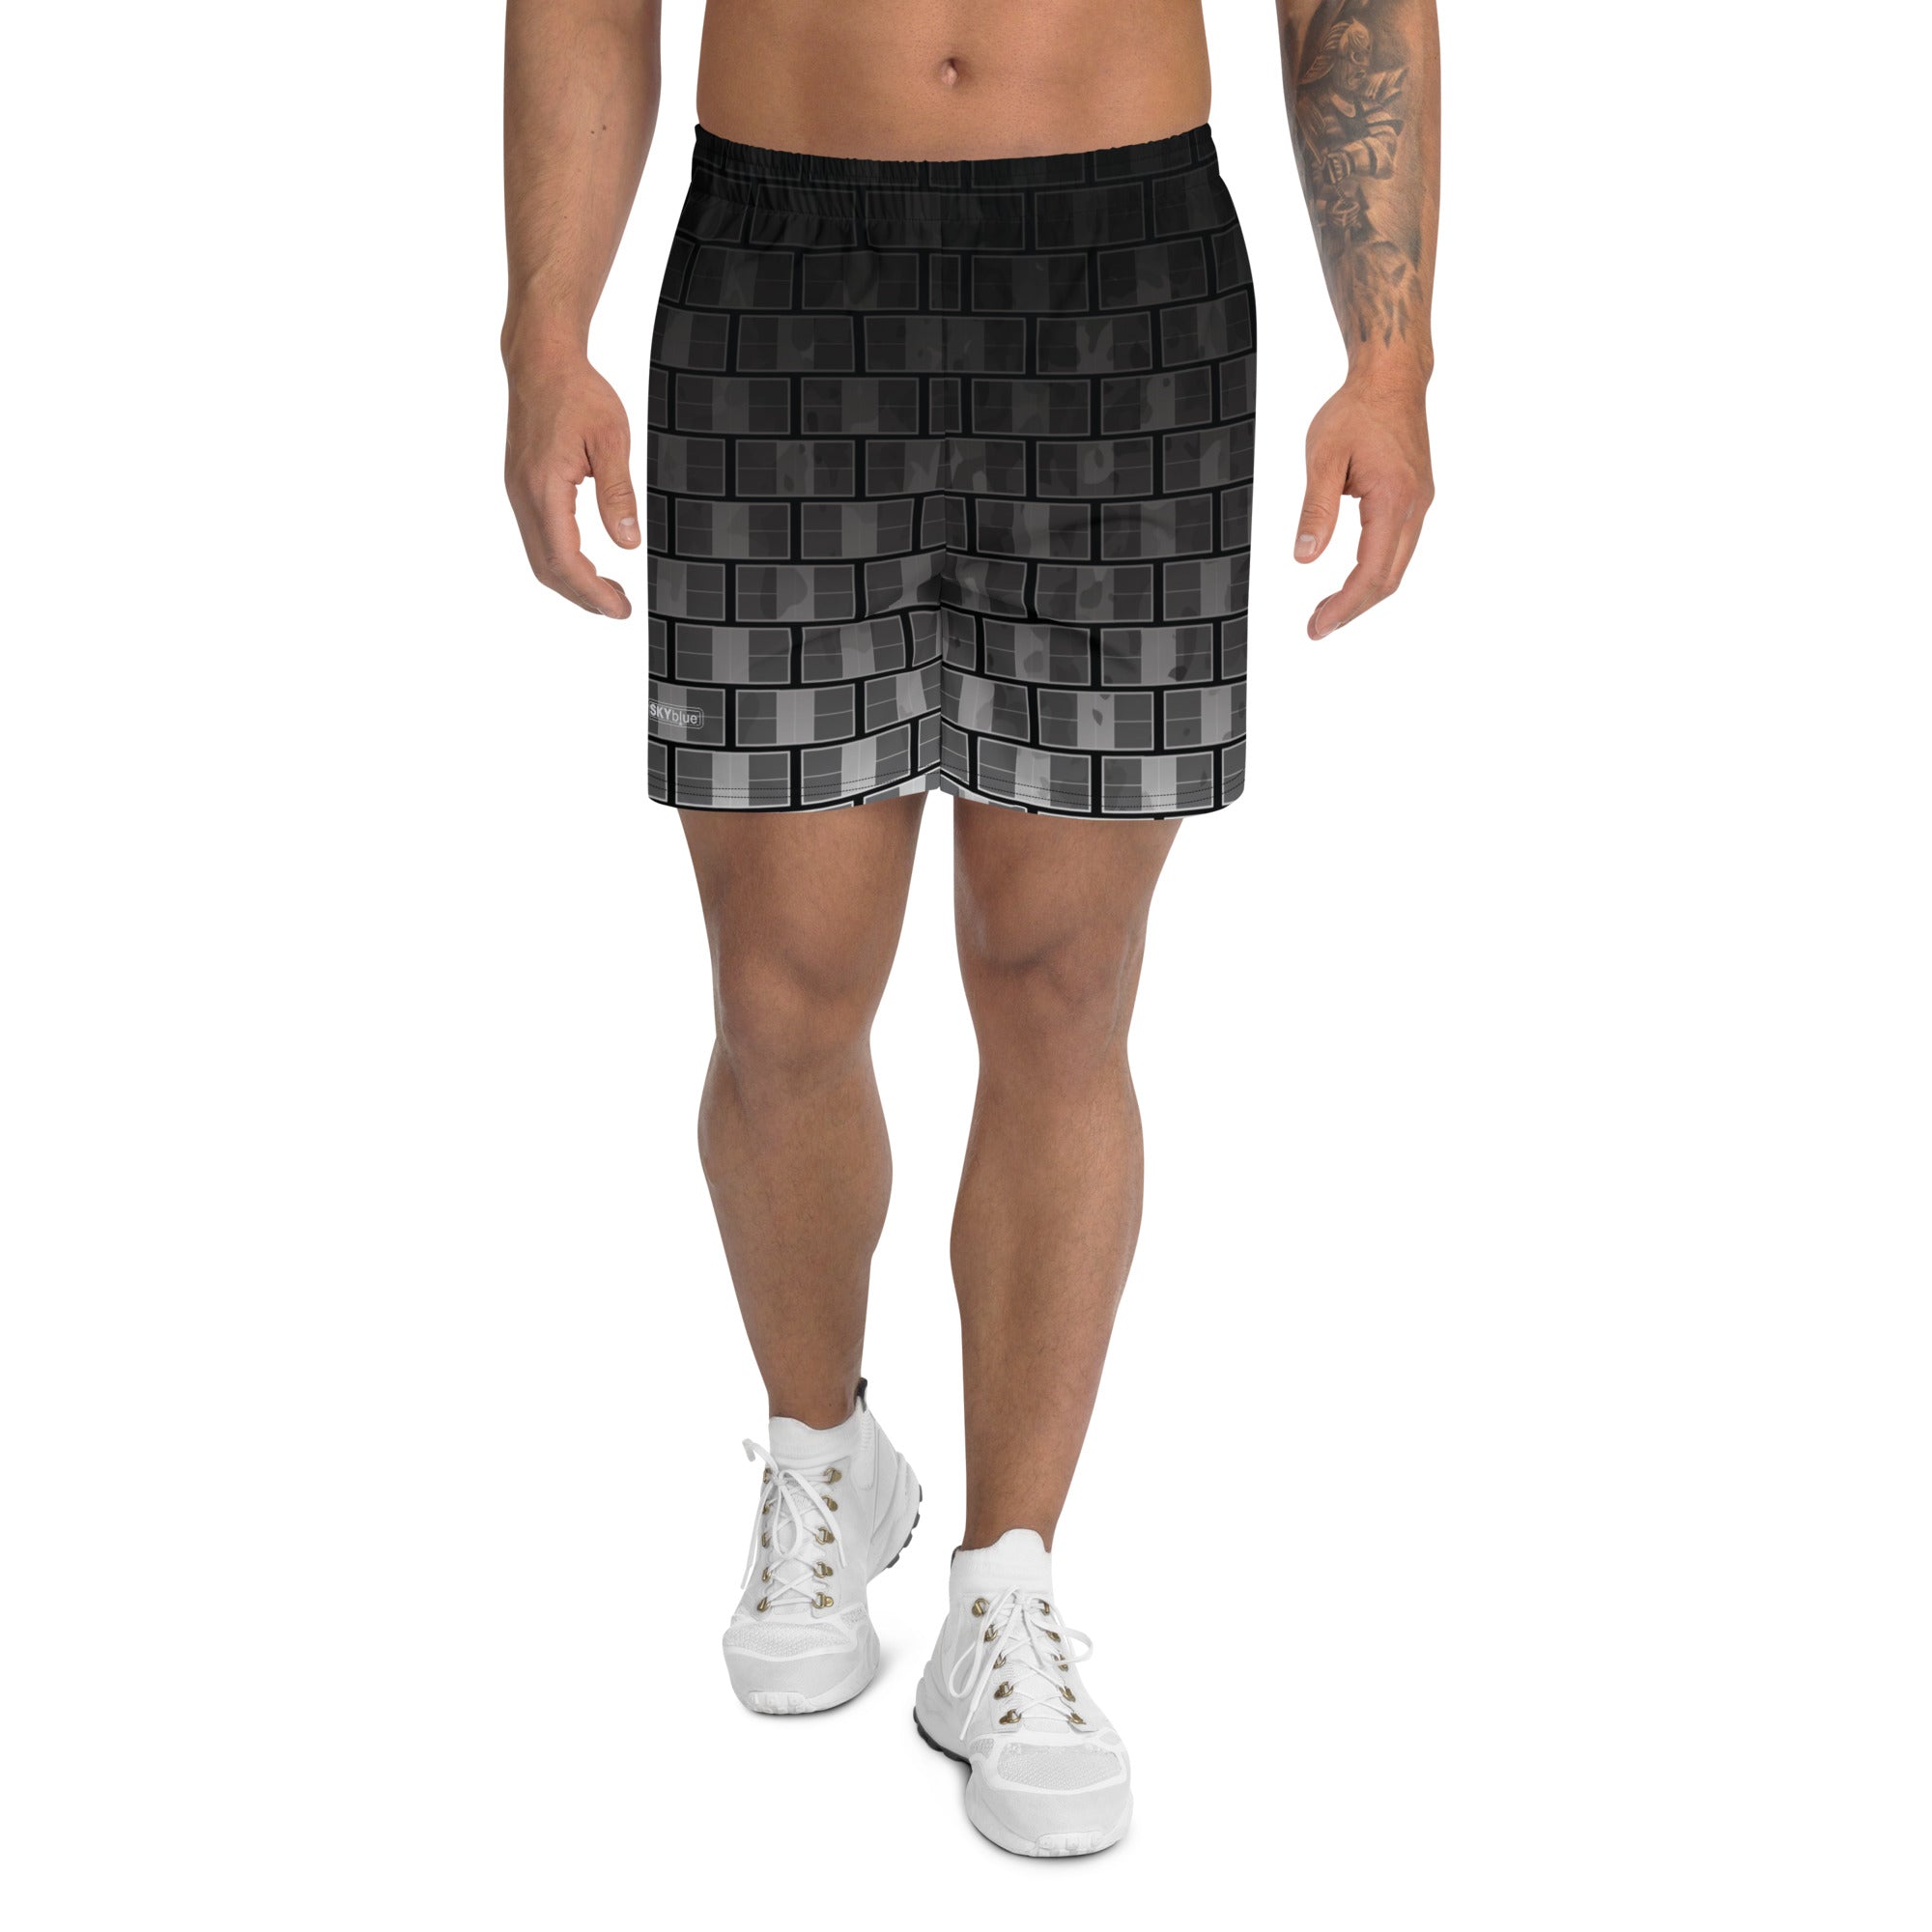 "I Campi da Pickleball©" Ombre 15 Shades of Grey Men's Long Casual Shorts for Pickleball Enthusiasts